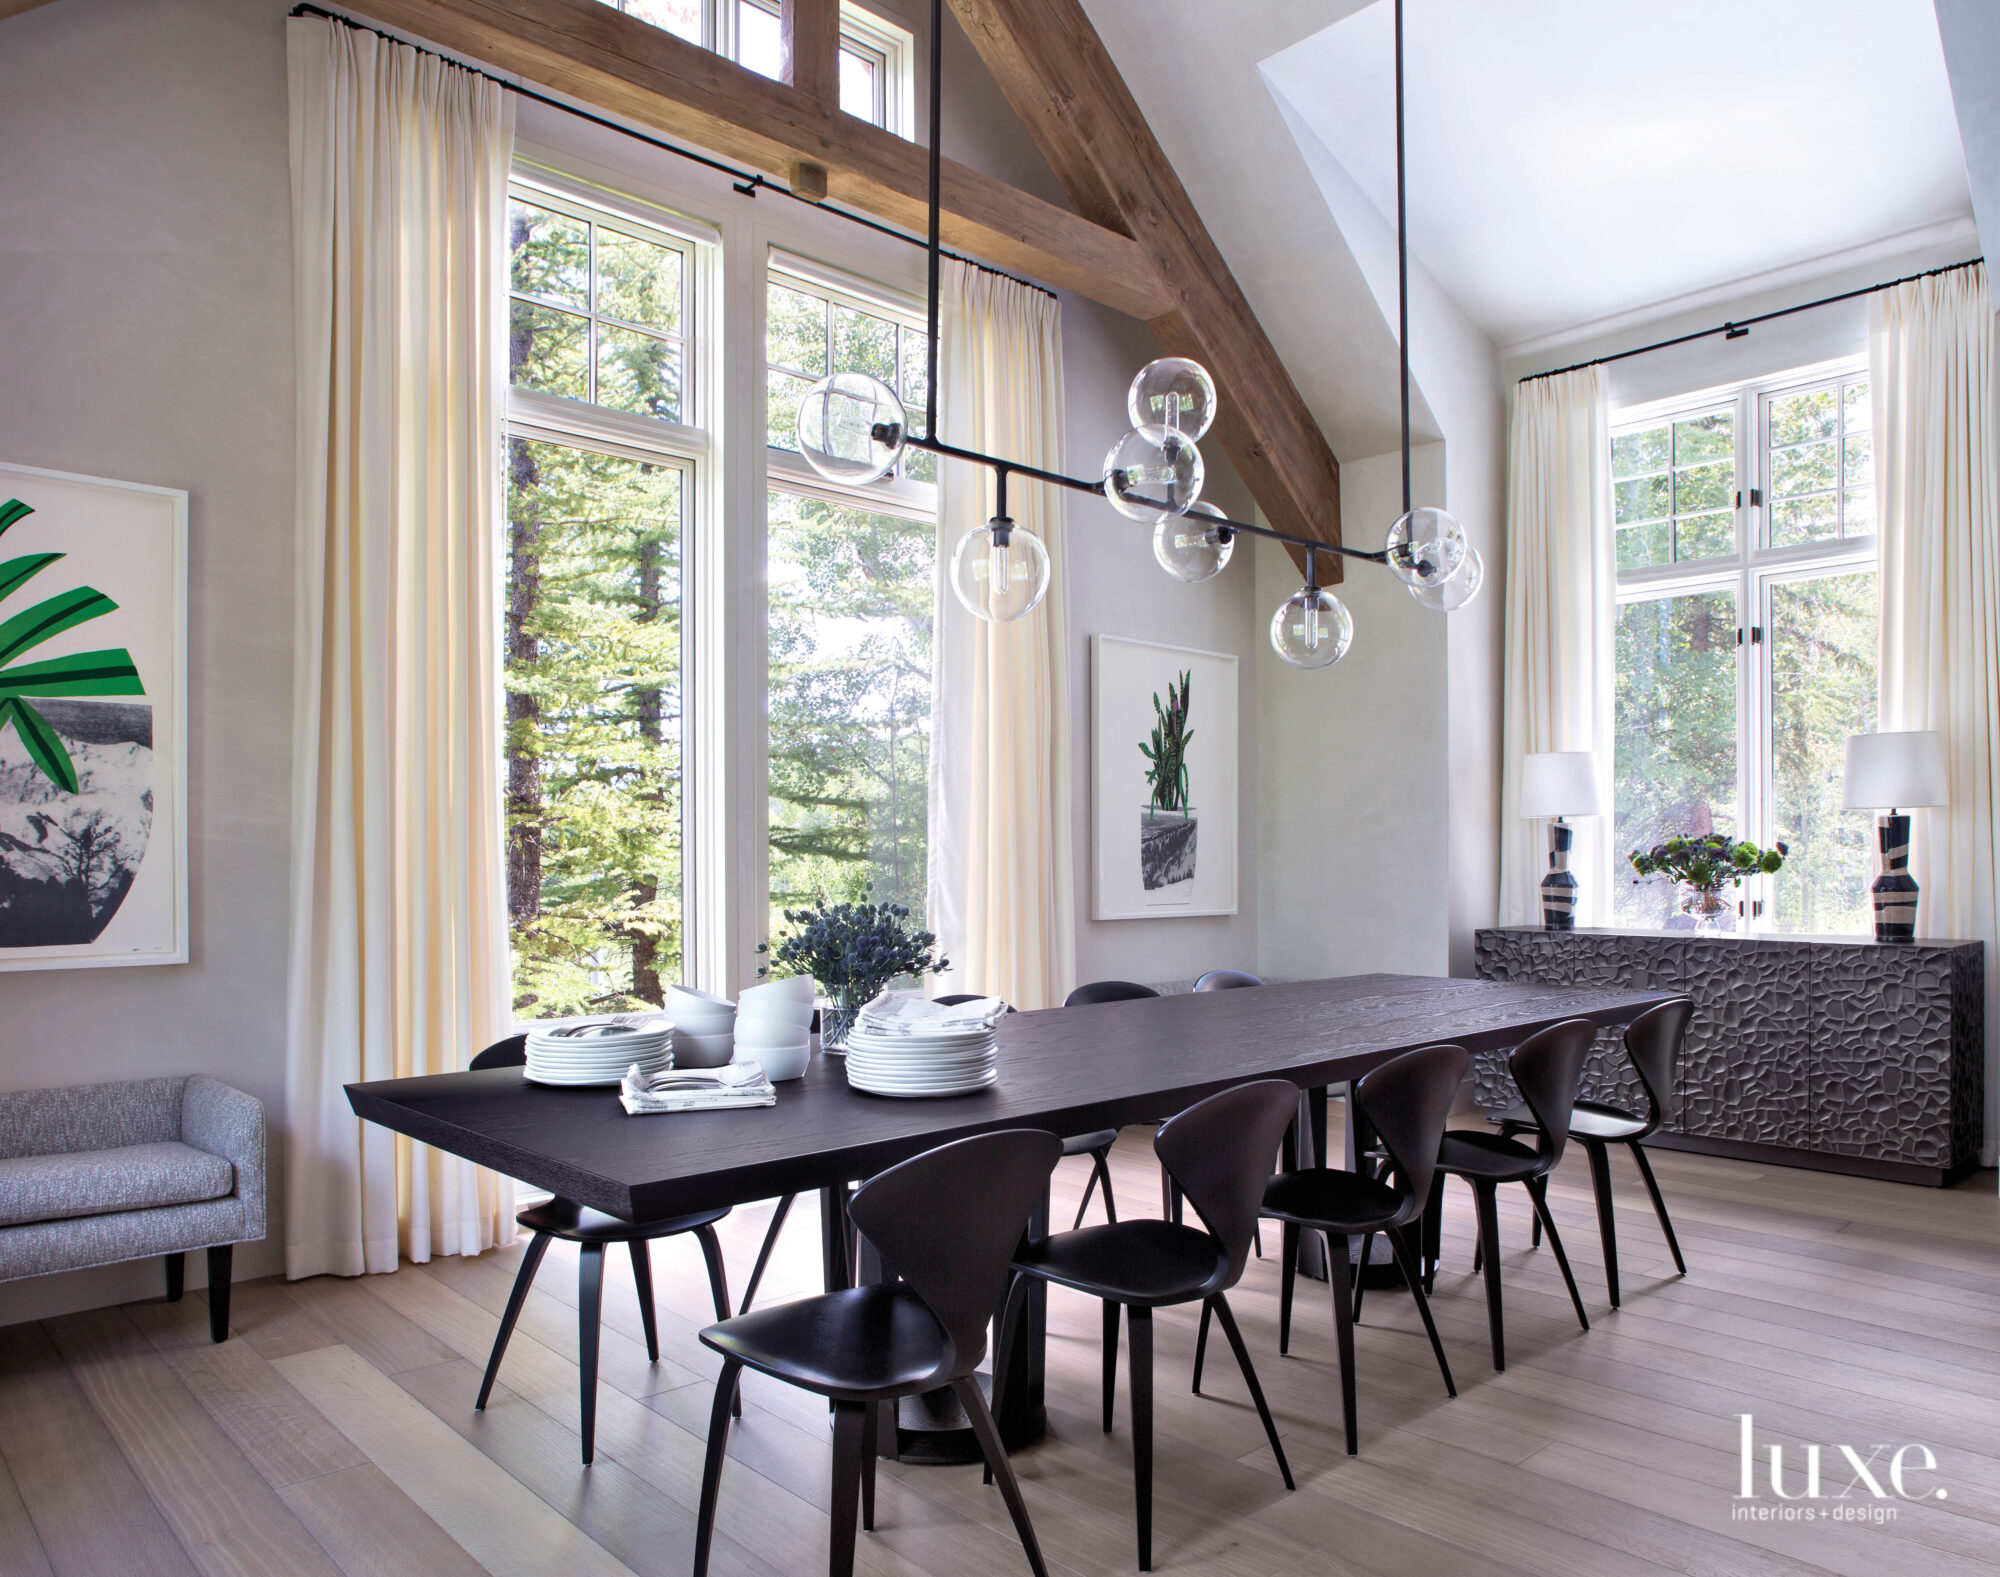 A dining room has a...